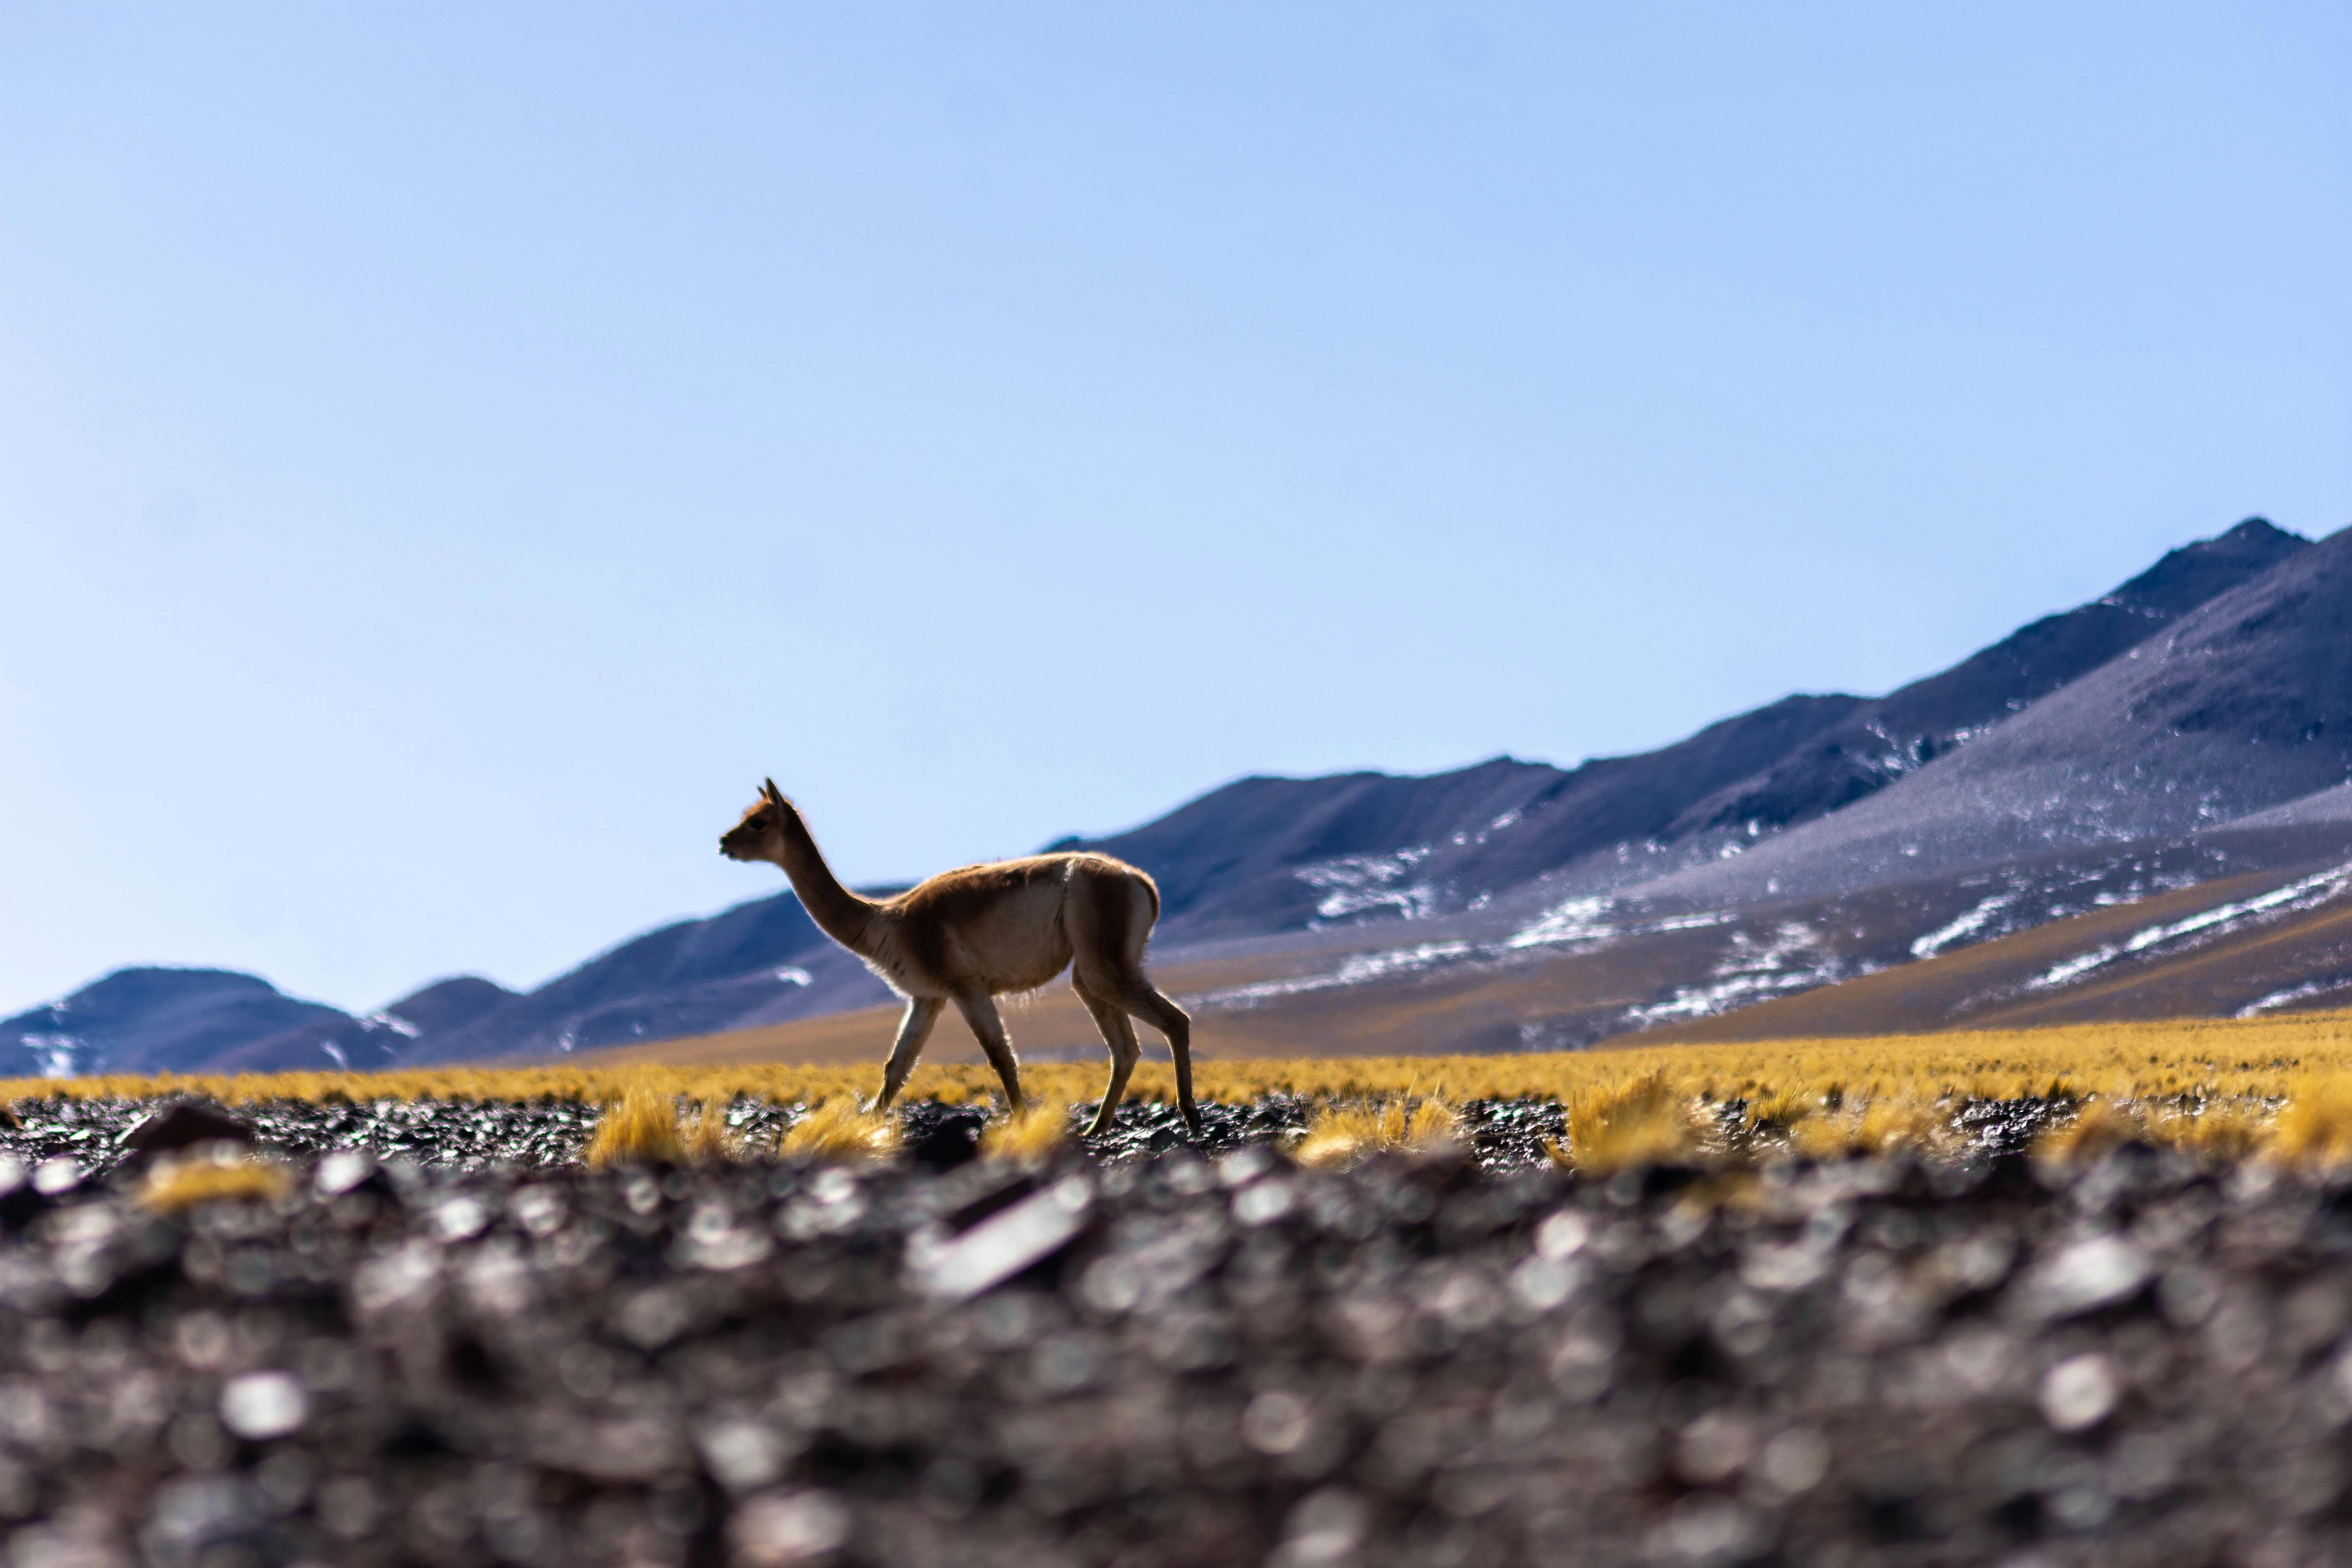 Vicuna Photos, Download The BEST Free Vicuna Stock Photos & HD Images